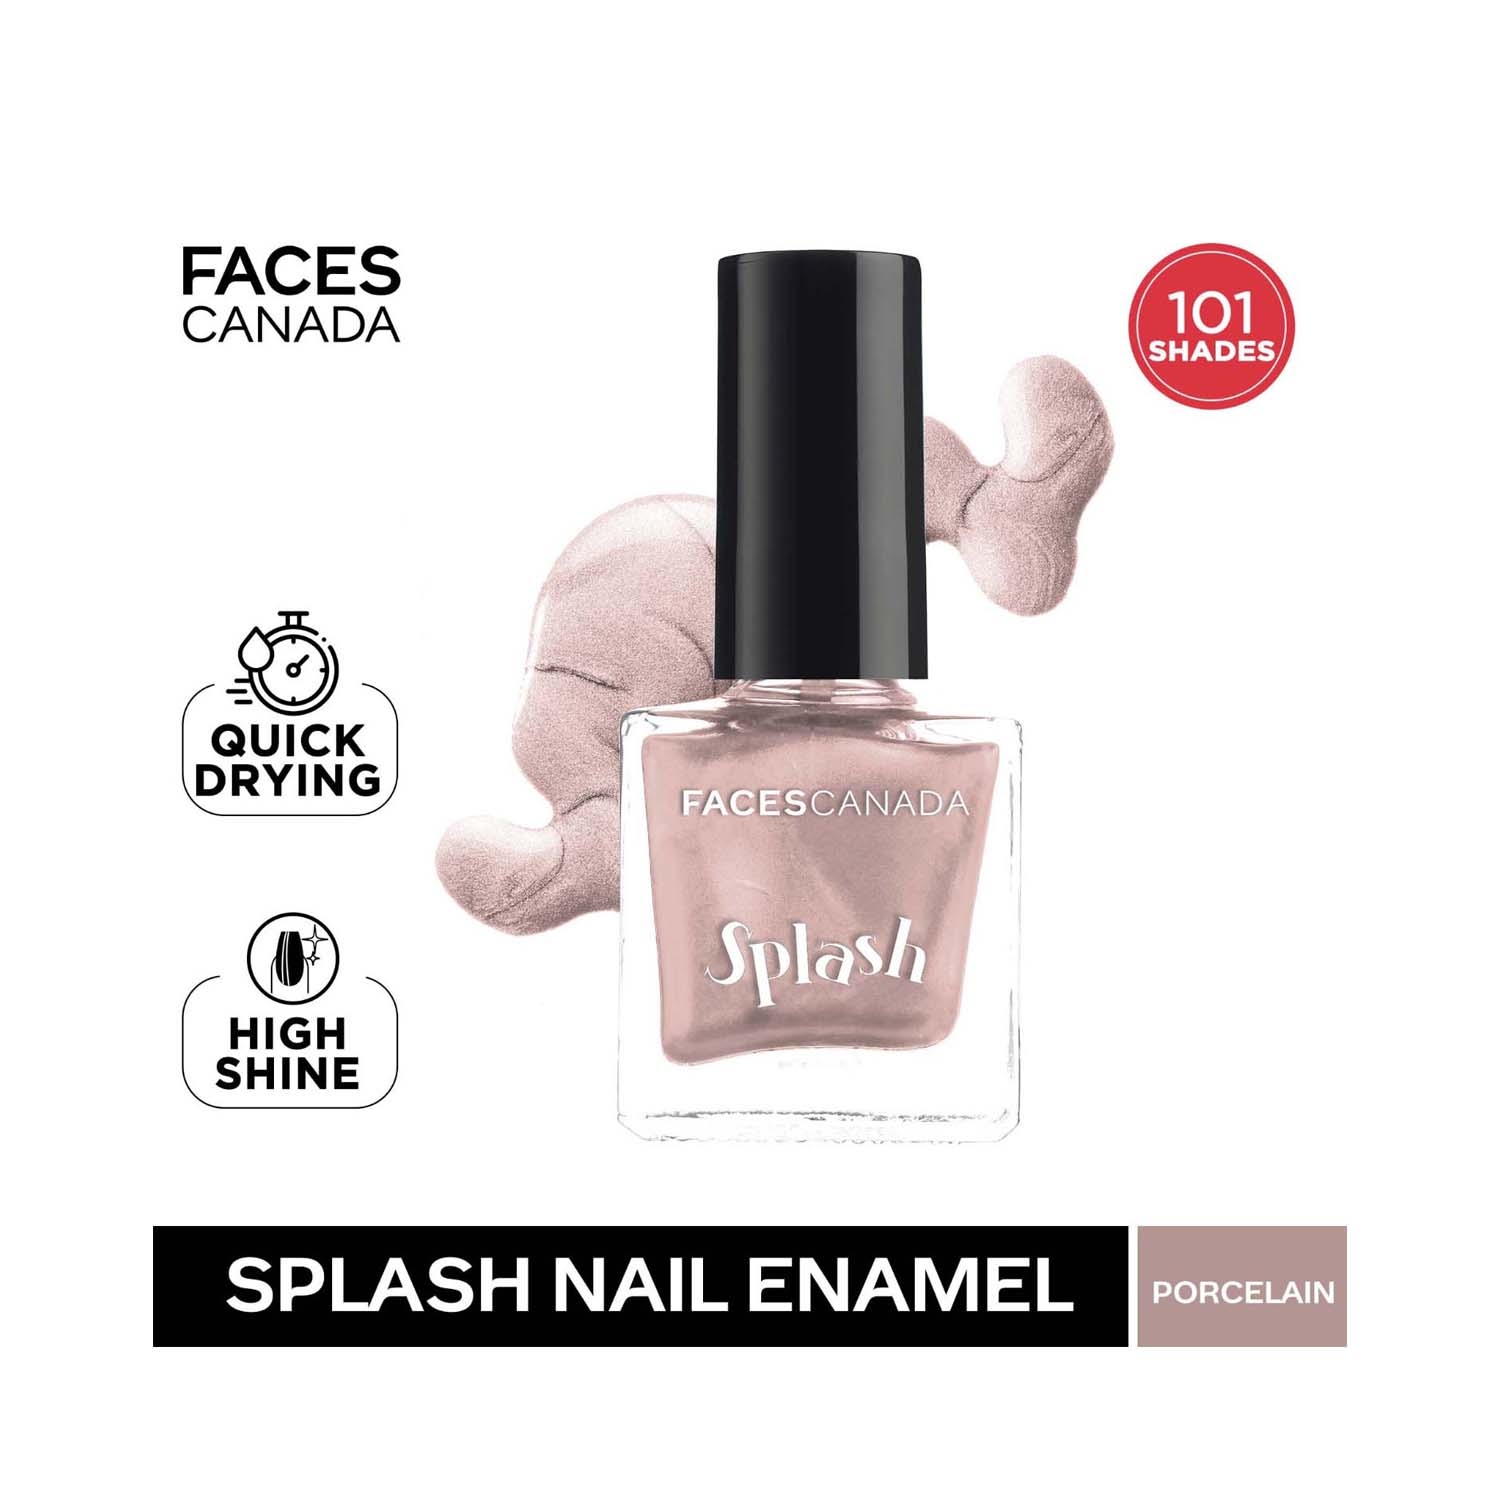 FACES CANADA Splash Nail Enamel Review: Glossy & Chip-Resistant